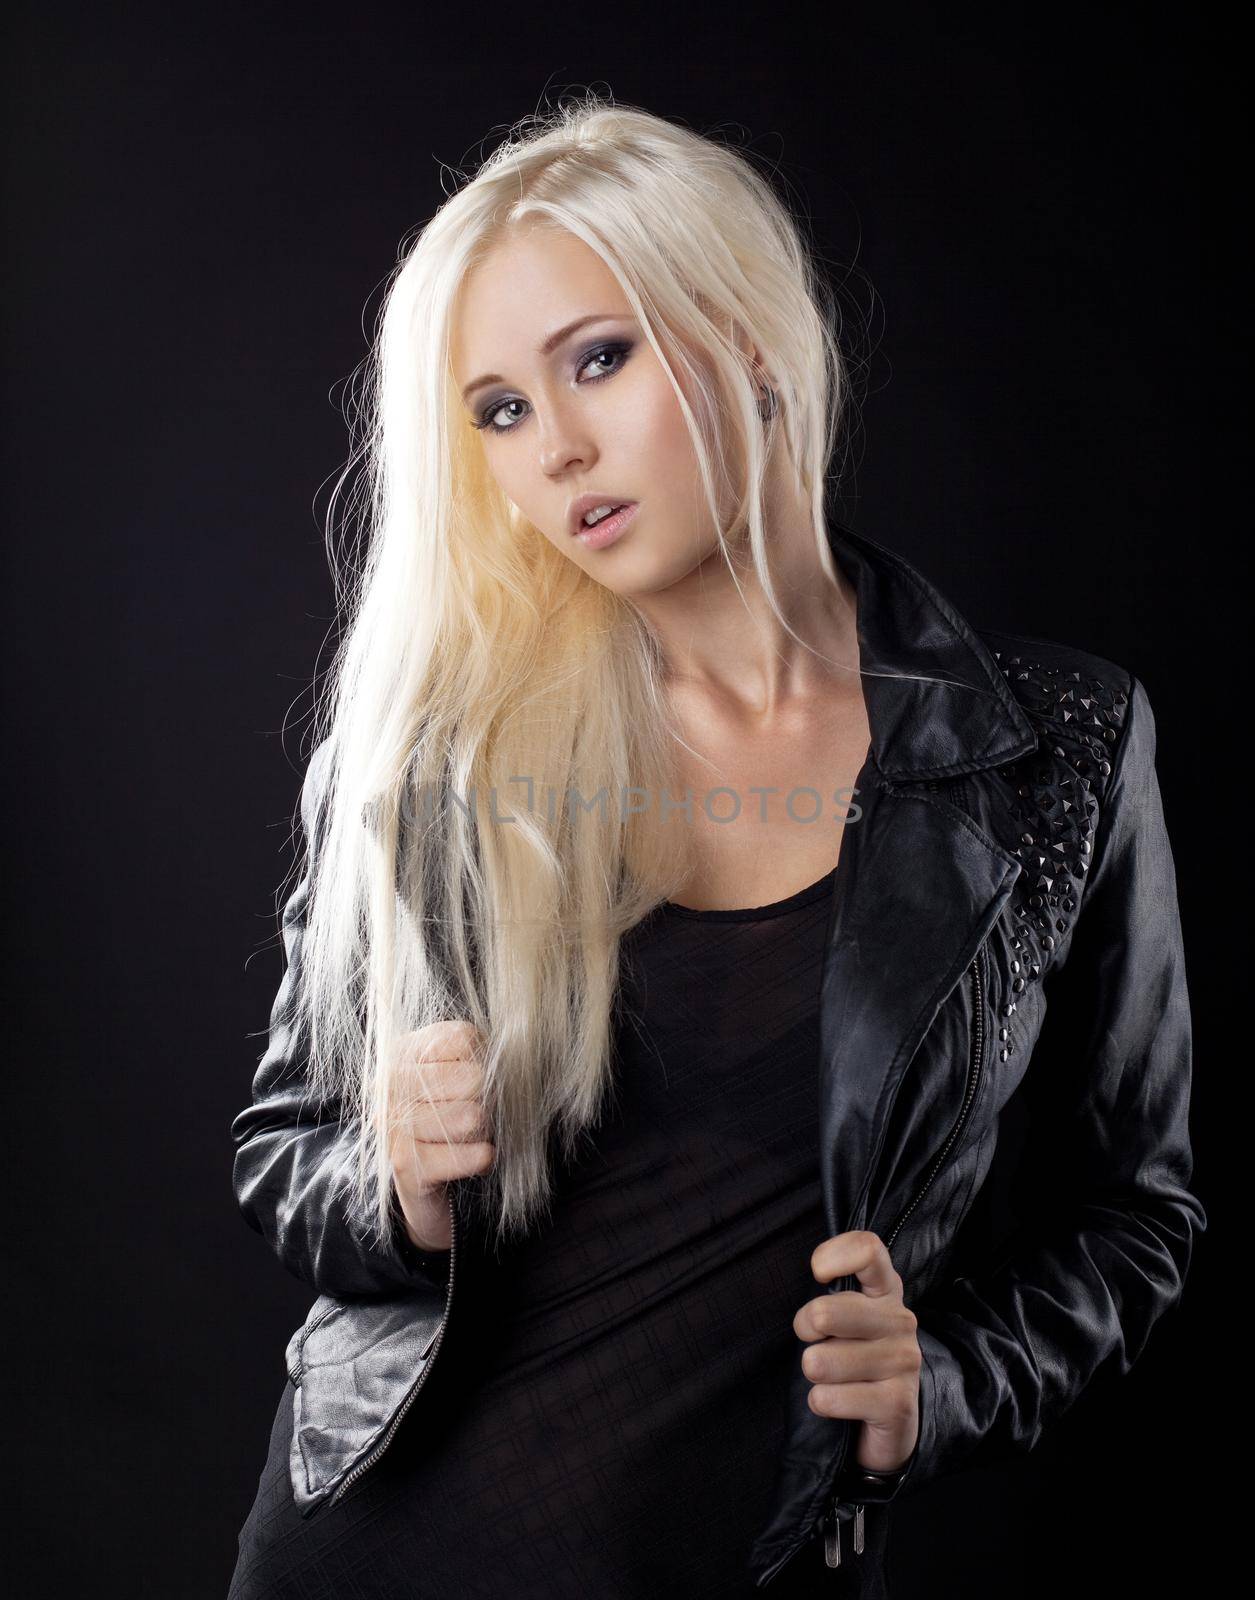 Beauty blond girl in leather jacket by rivertime